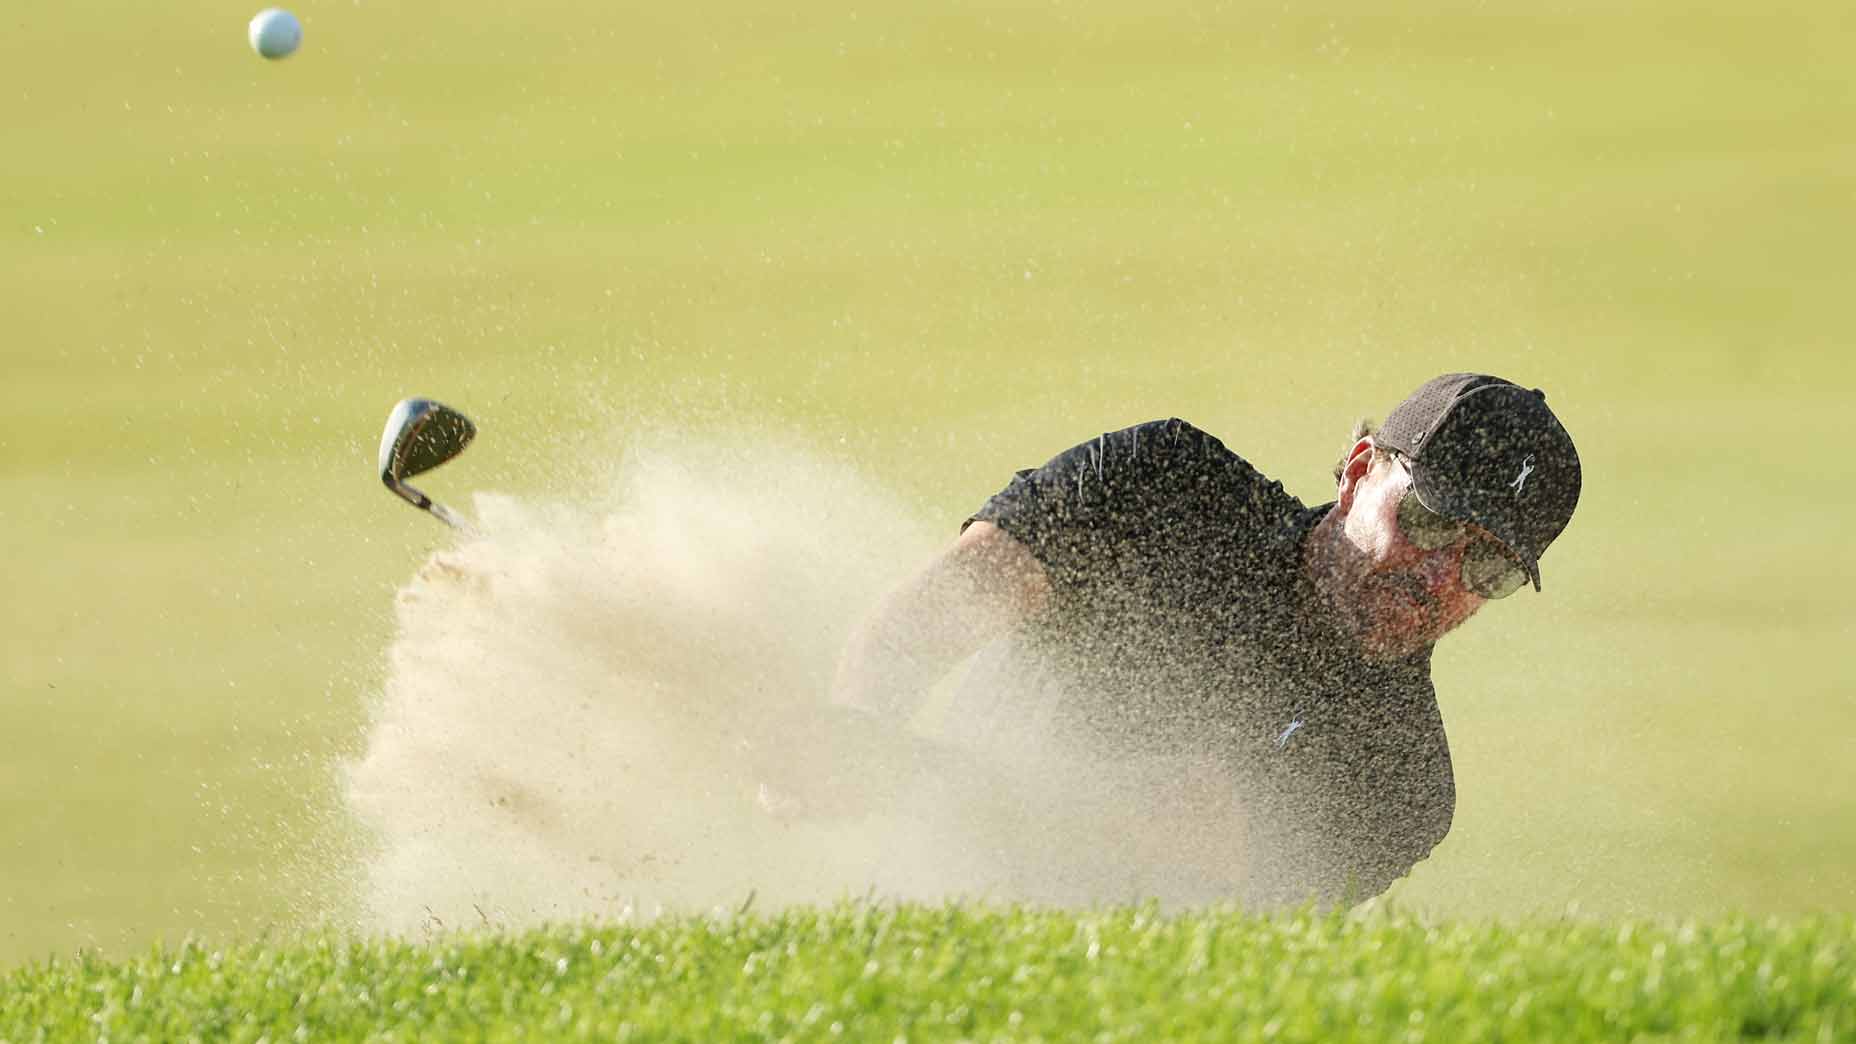 phil mickelson hits a bunker shot during the 2022 u.s. open